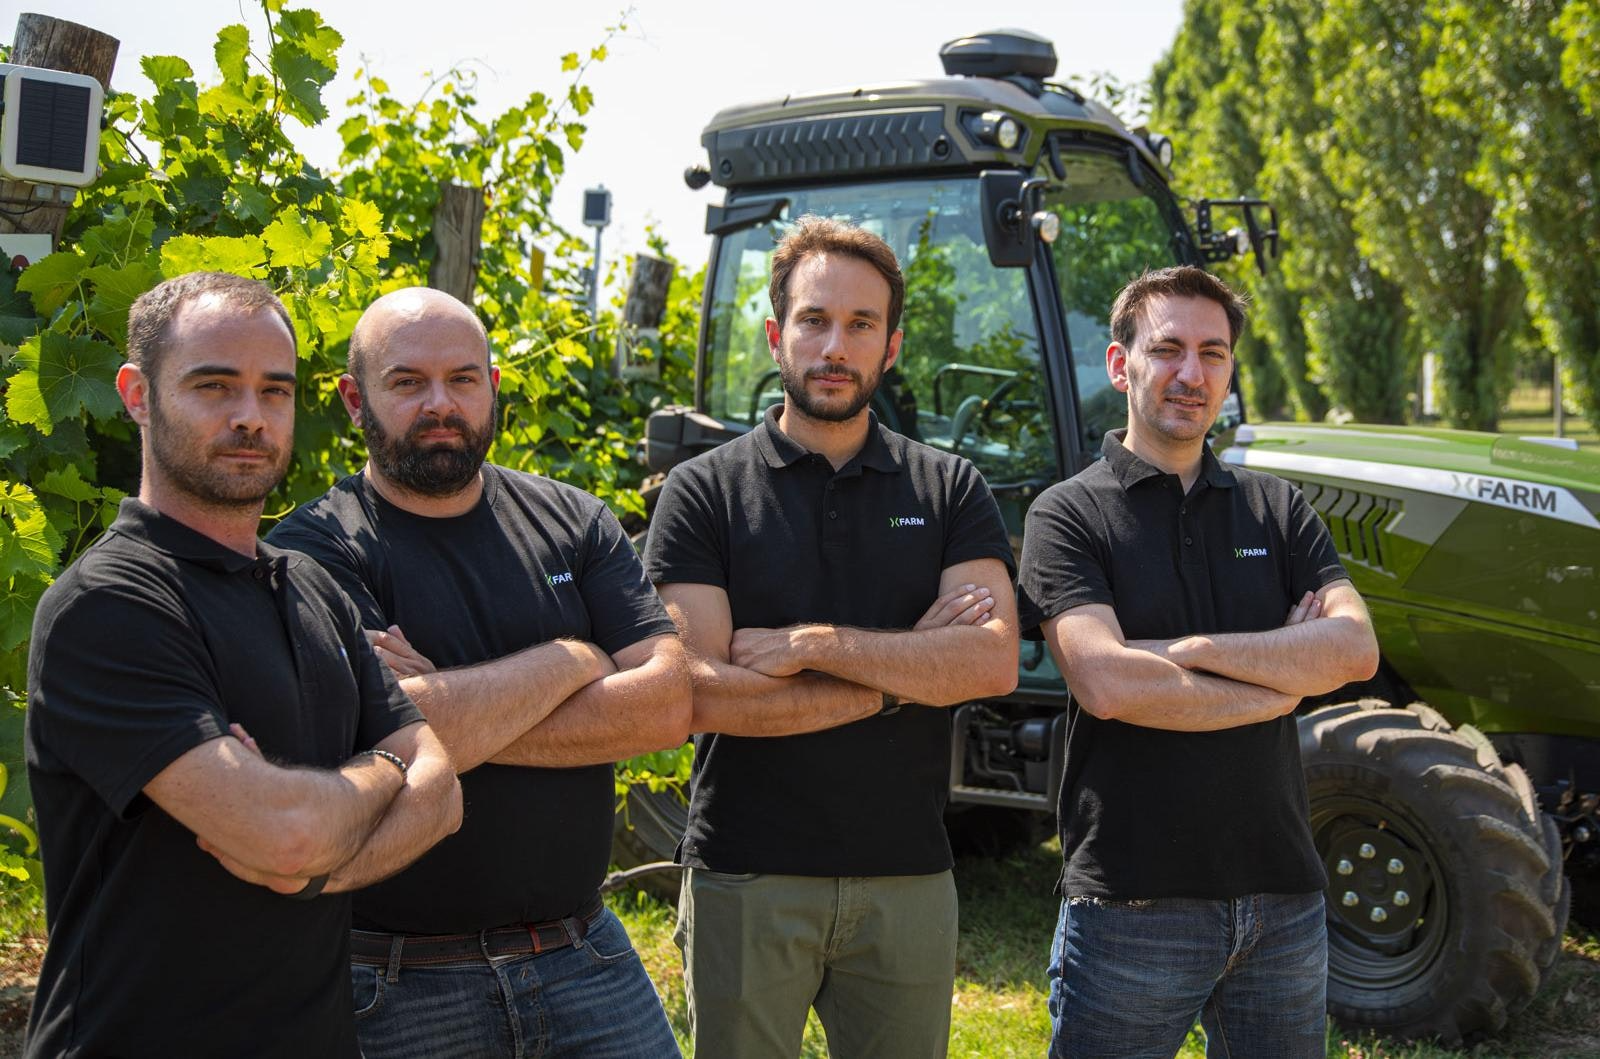 xFarm Technologies secures EUR 17 million to make agriculture sustainable